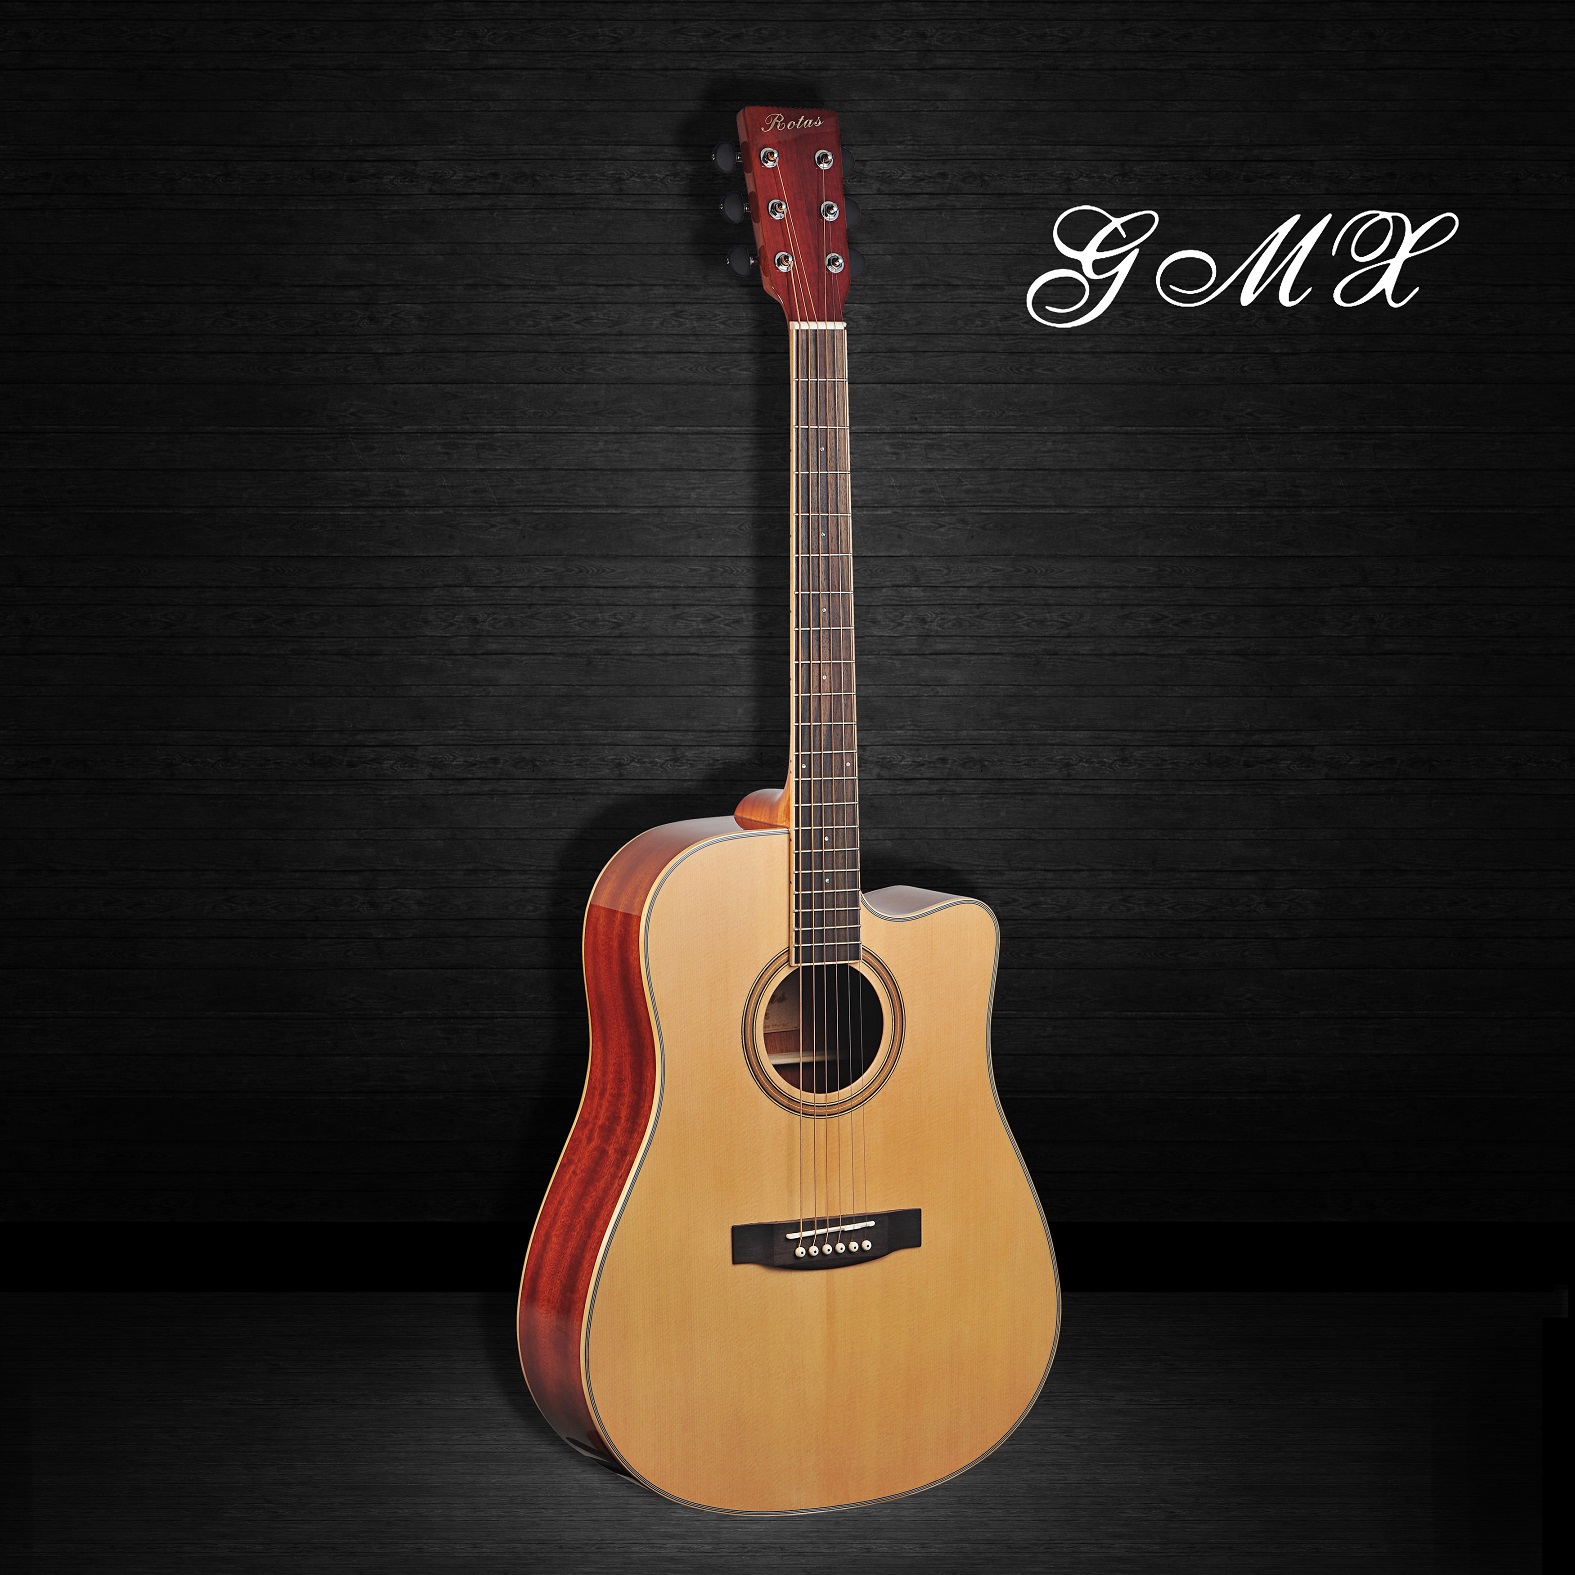 41" Top quality with good price chinese acoustic guitar